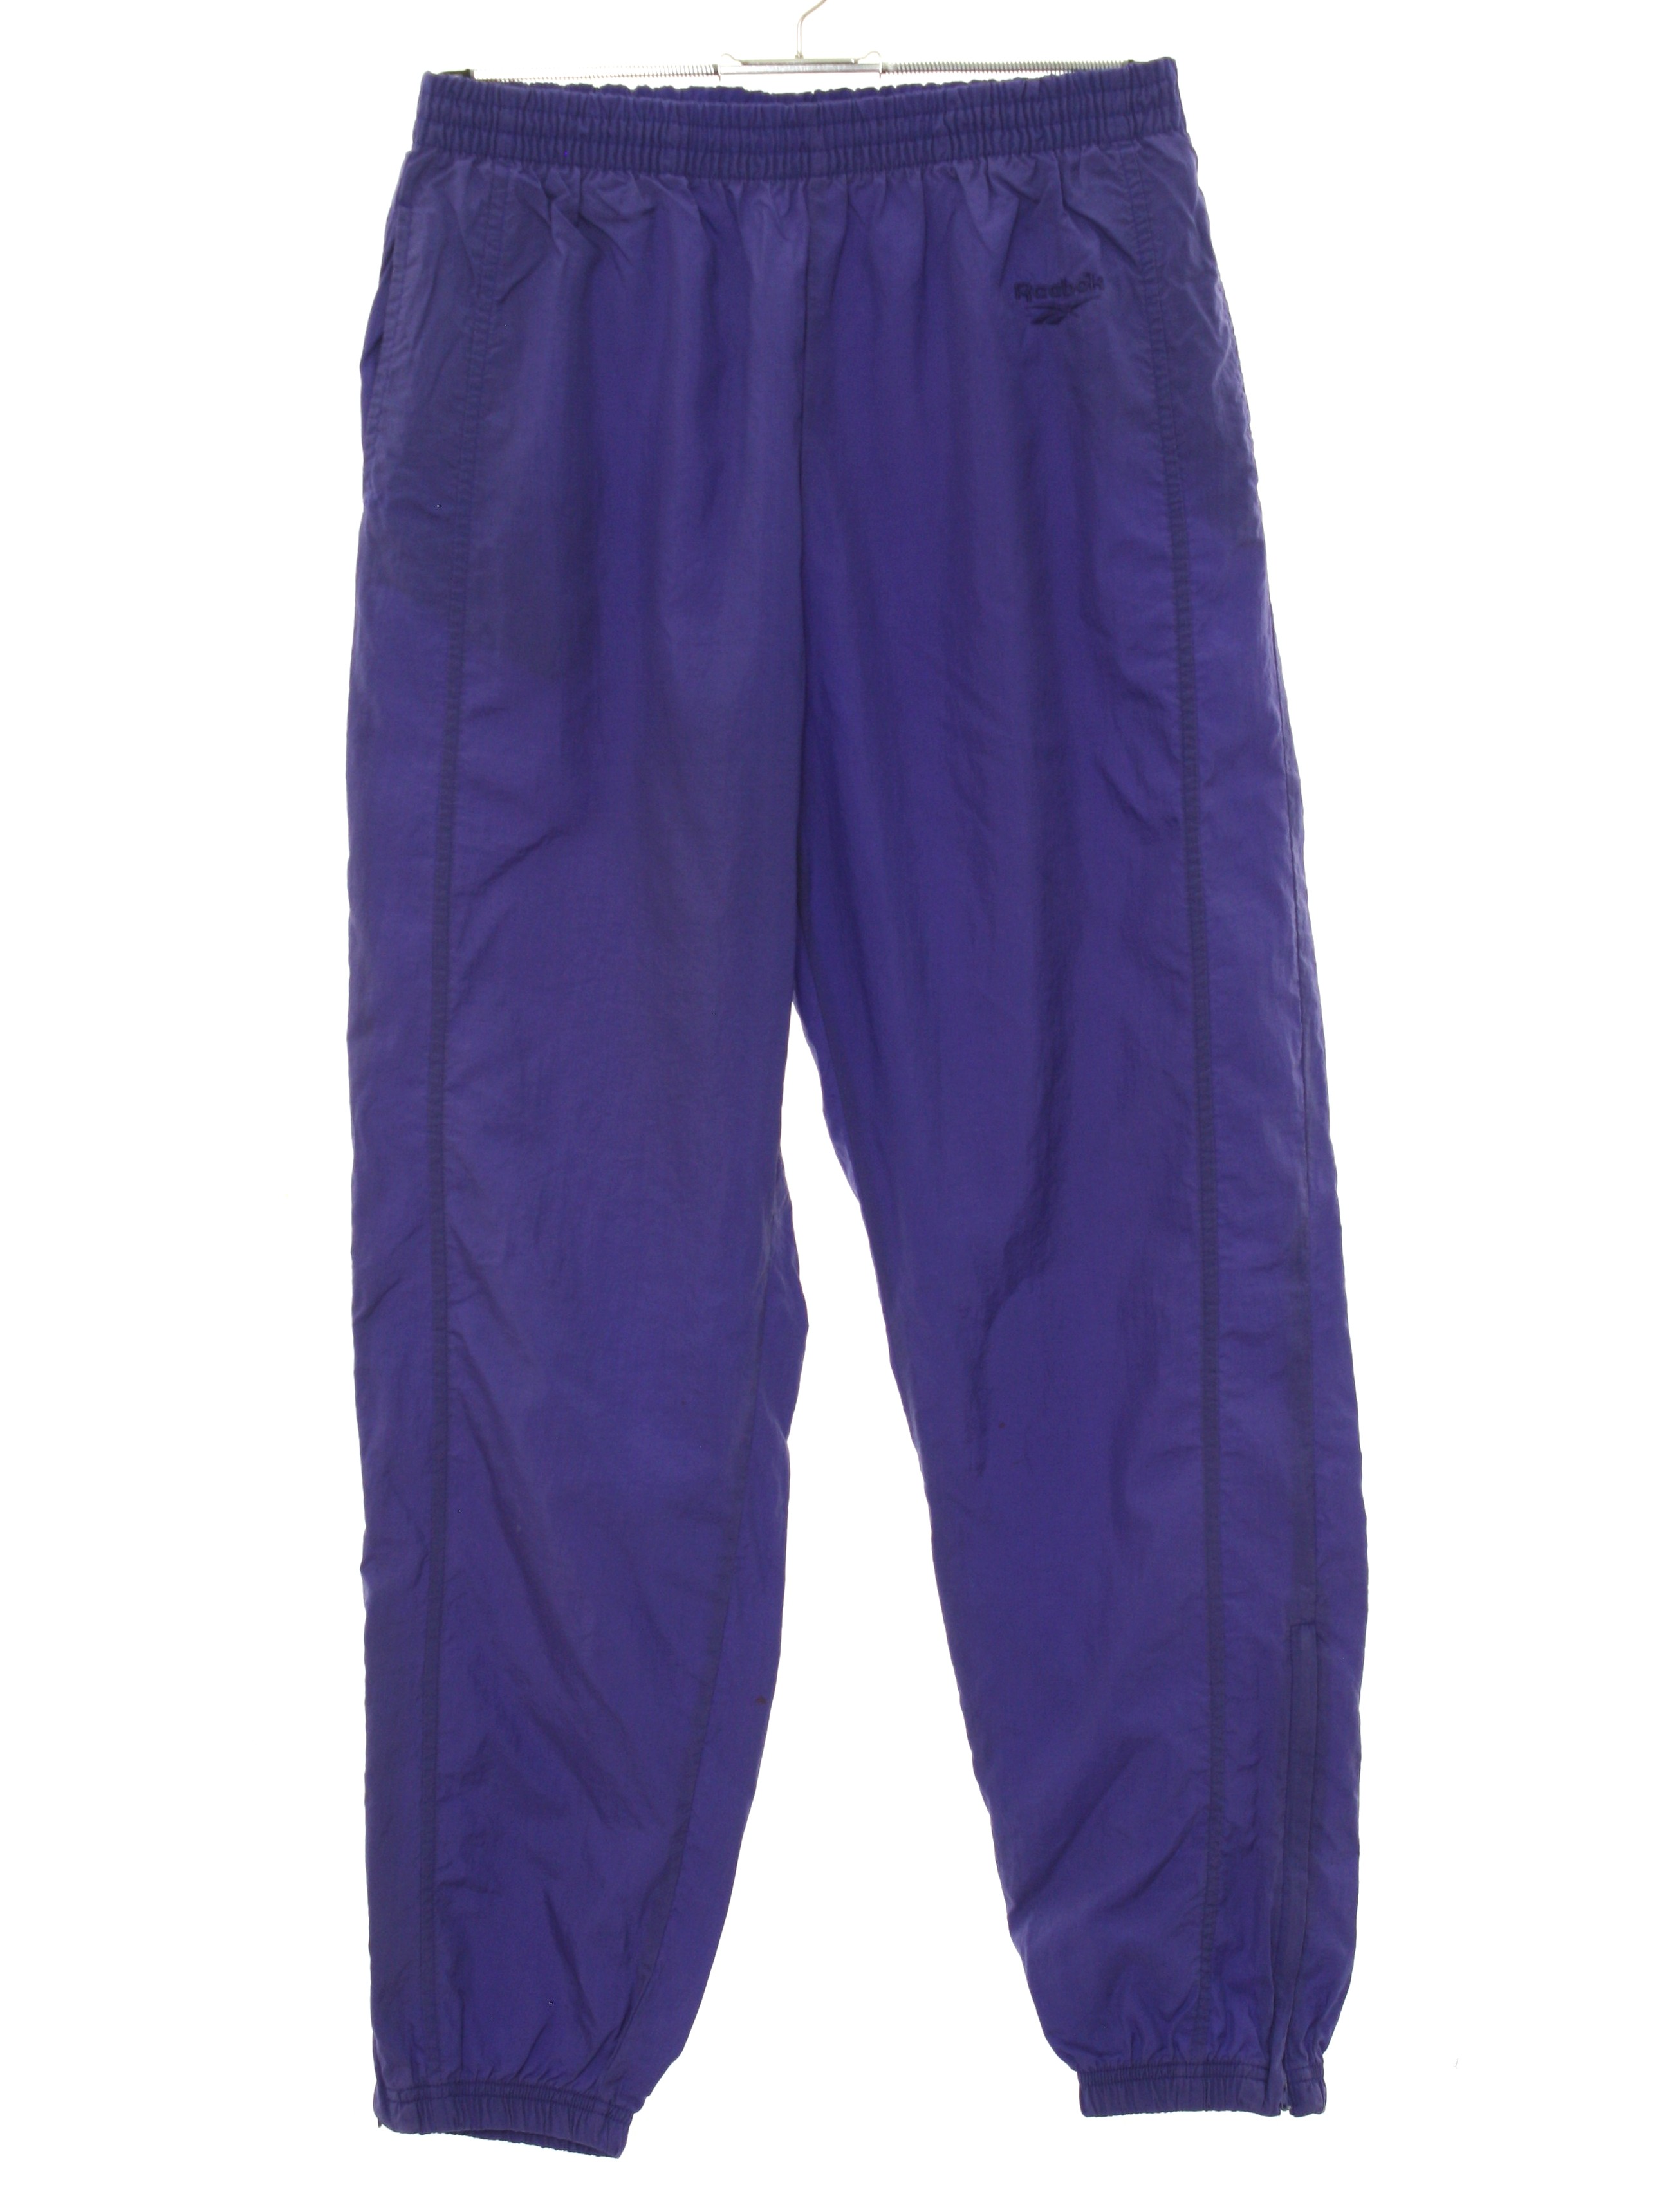 slightly tapered leg baggy track pants 